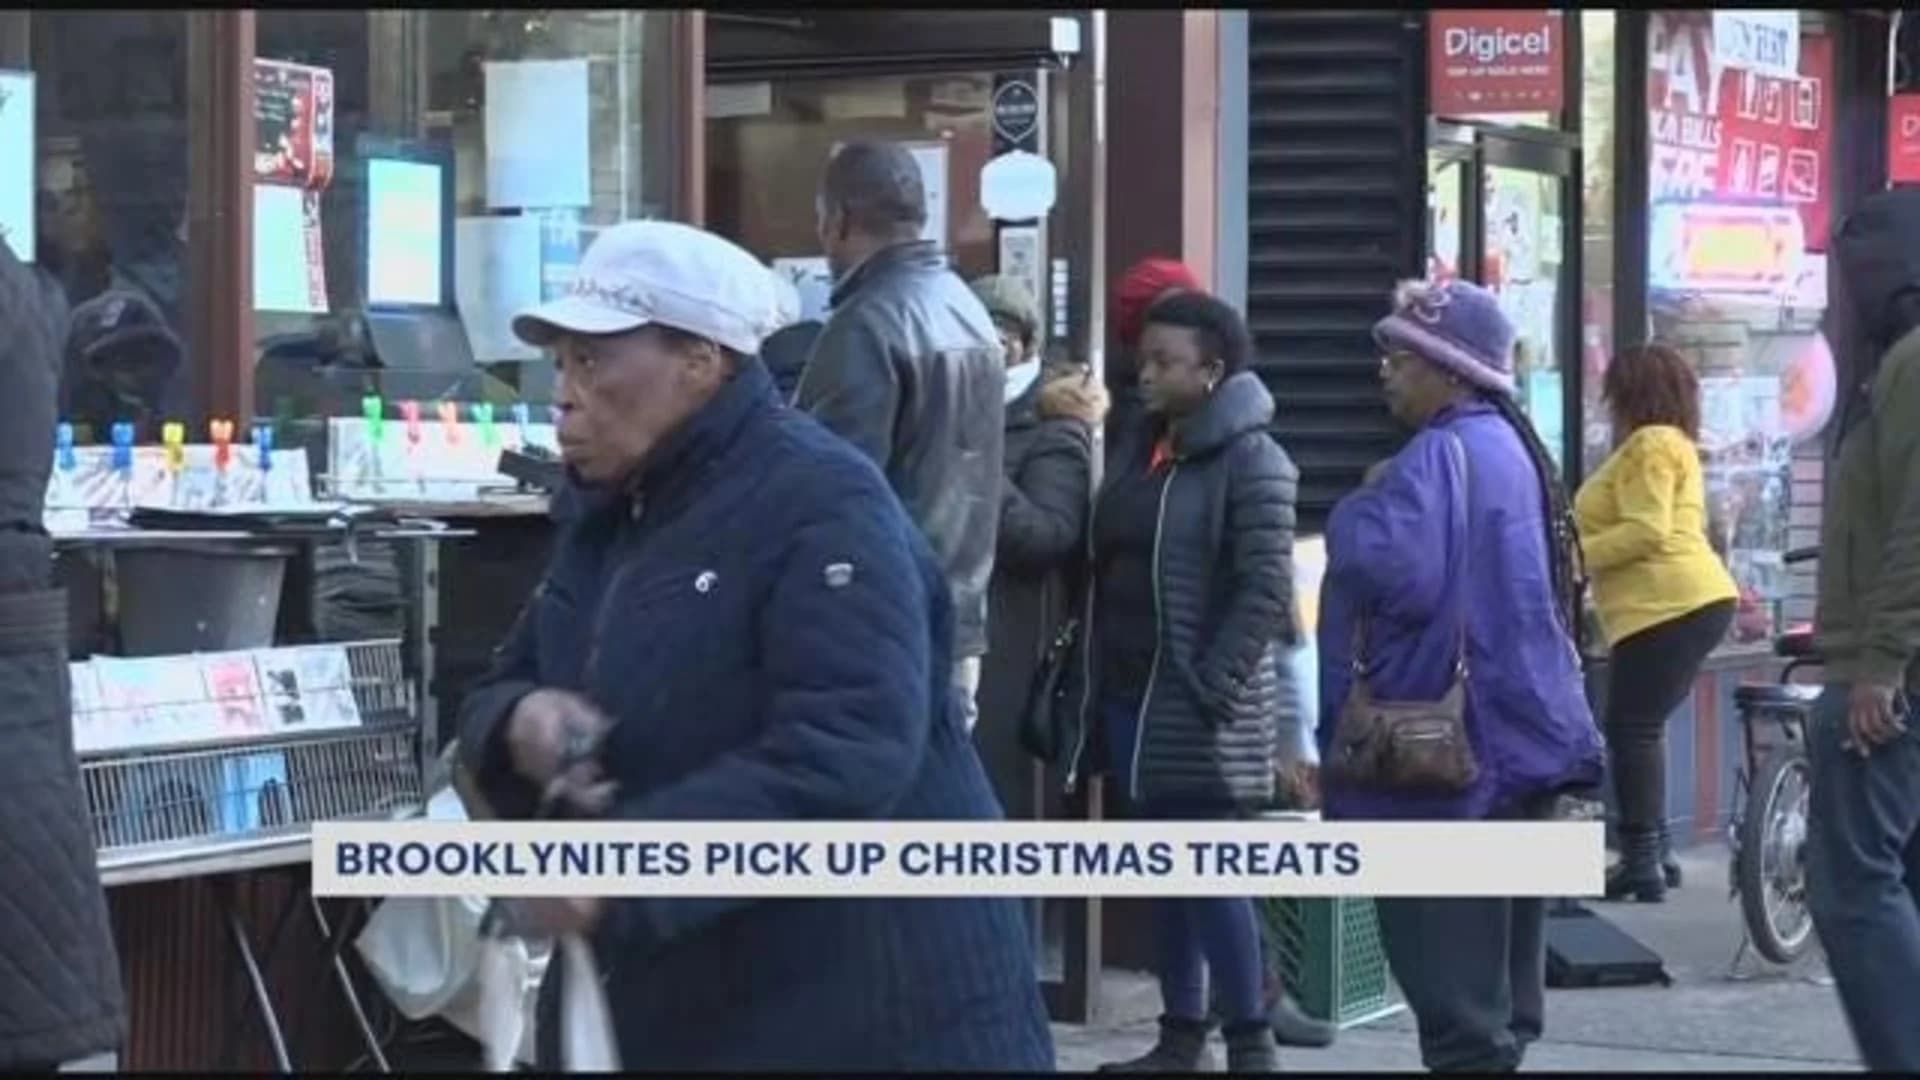 Long lines of customers stream into Brooklyn bakery for unique Caribbean sweets